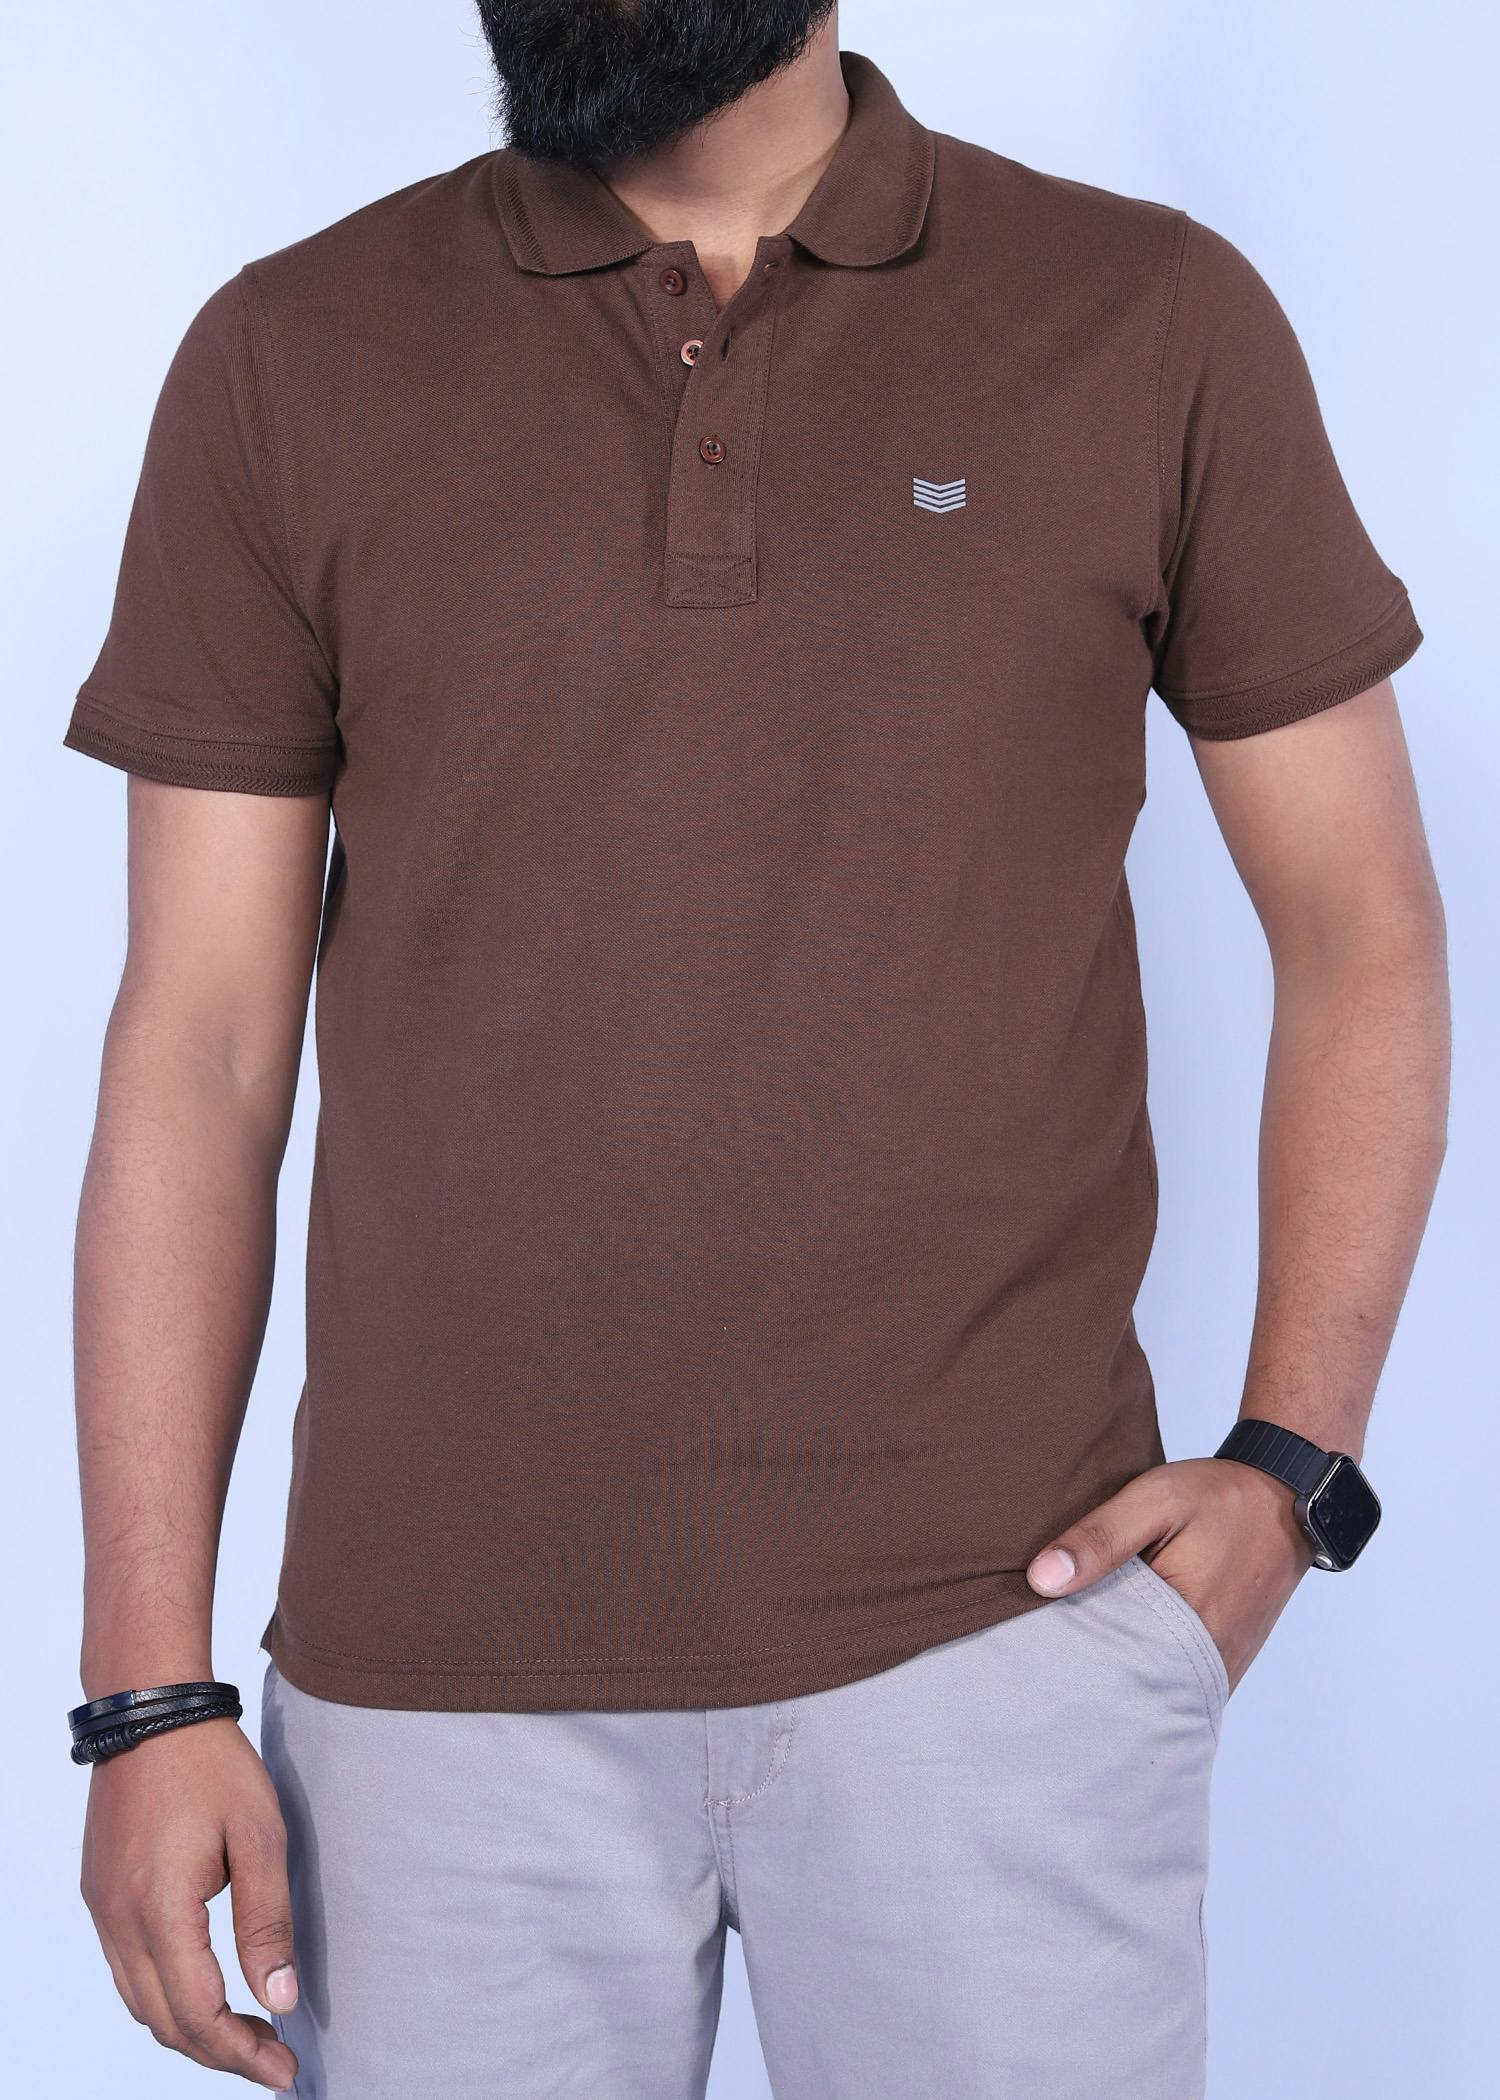 nightingale x polo brown half front view